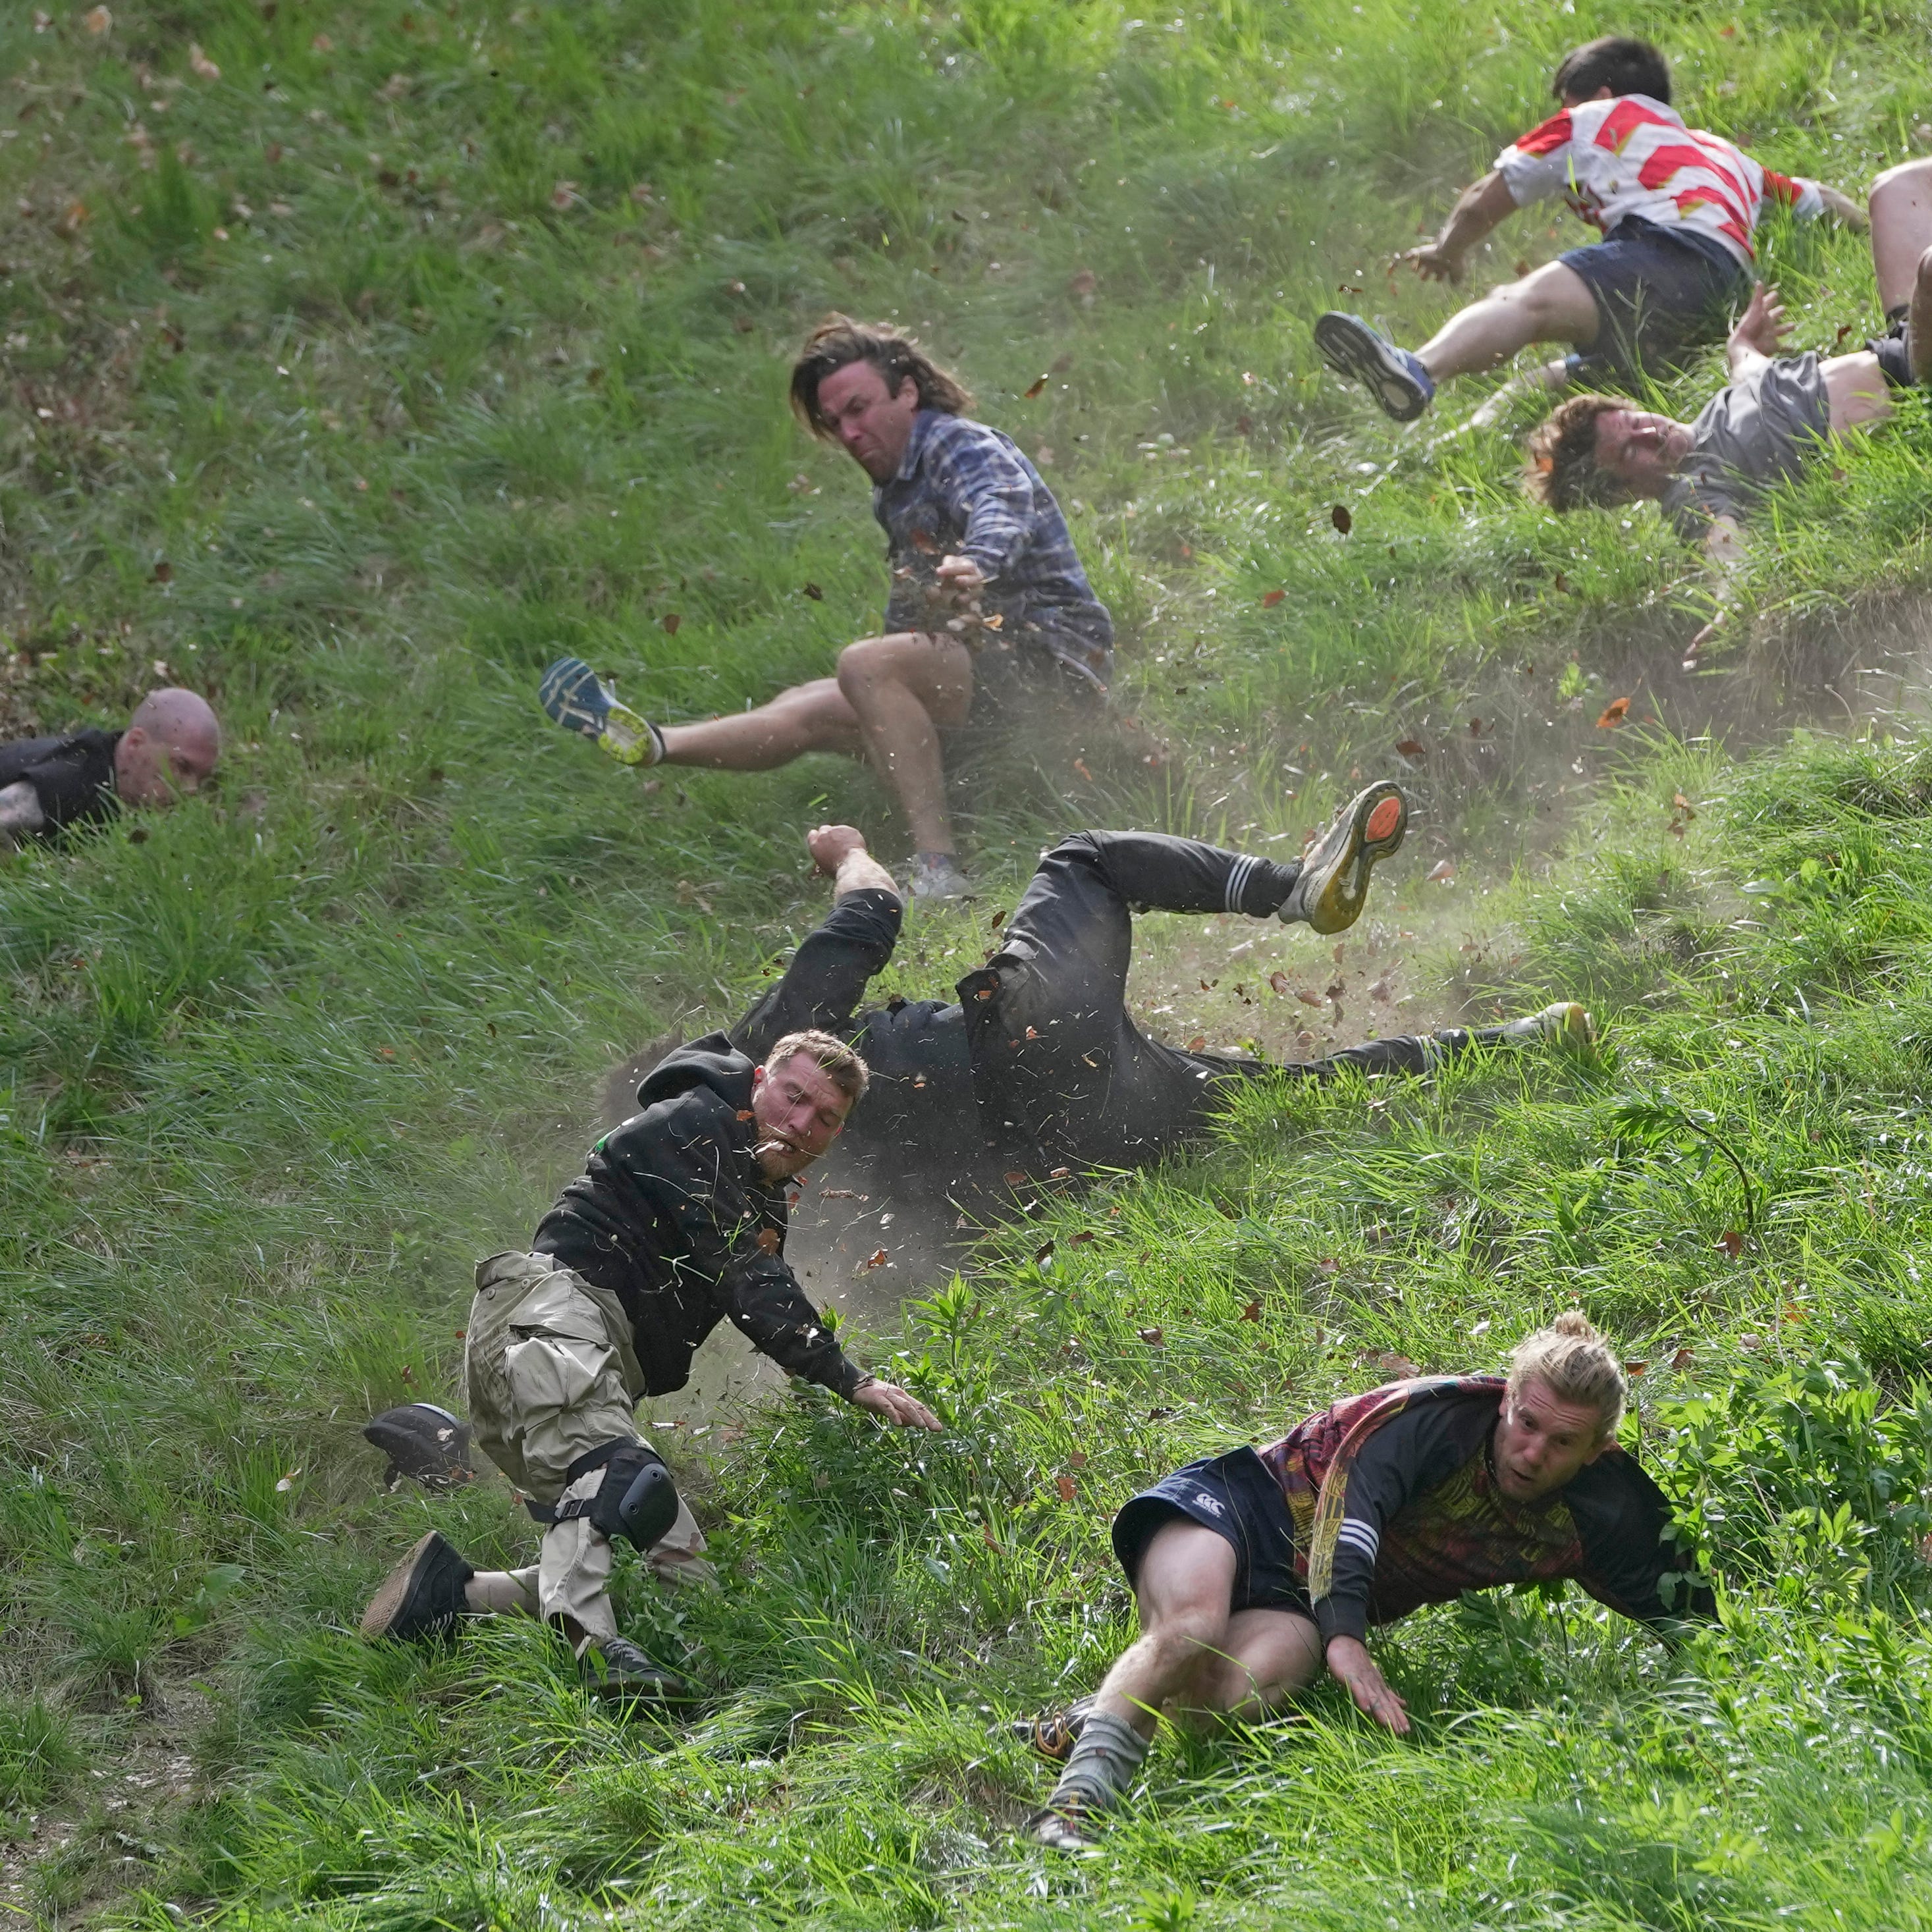 May 29, 2023: Participants compete in the men's downhill race during the Cheese Rolling contest at Cooper's Hill in Brockworth, Gloucestershire. The Cooper's Hill Cheese-Rolling and Wake is an annual event where participants race down the 200-yard (180 m) long hill chasing a wheel of double gloucester cheese.